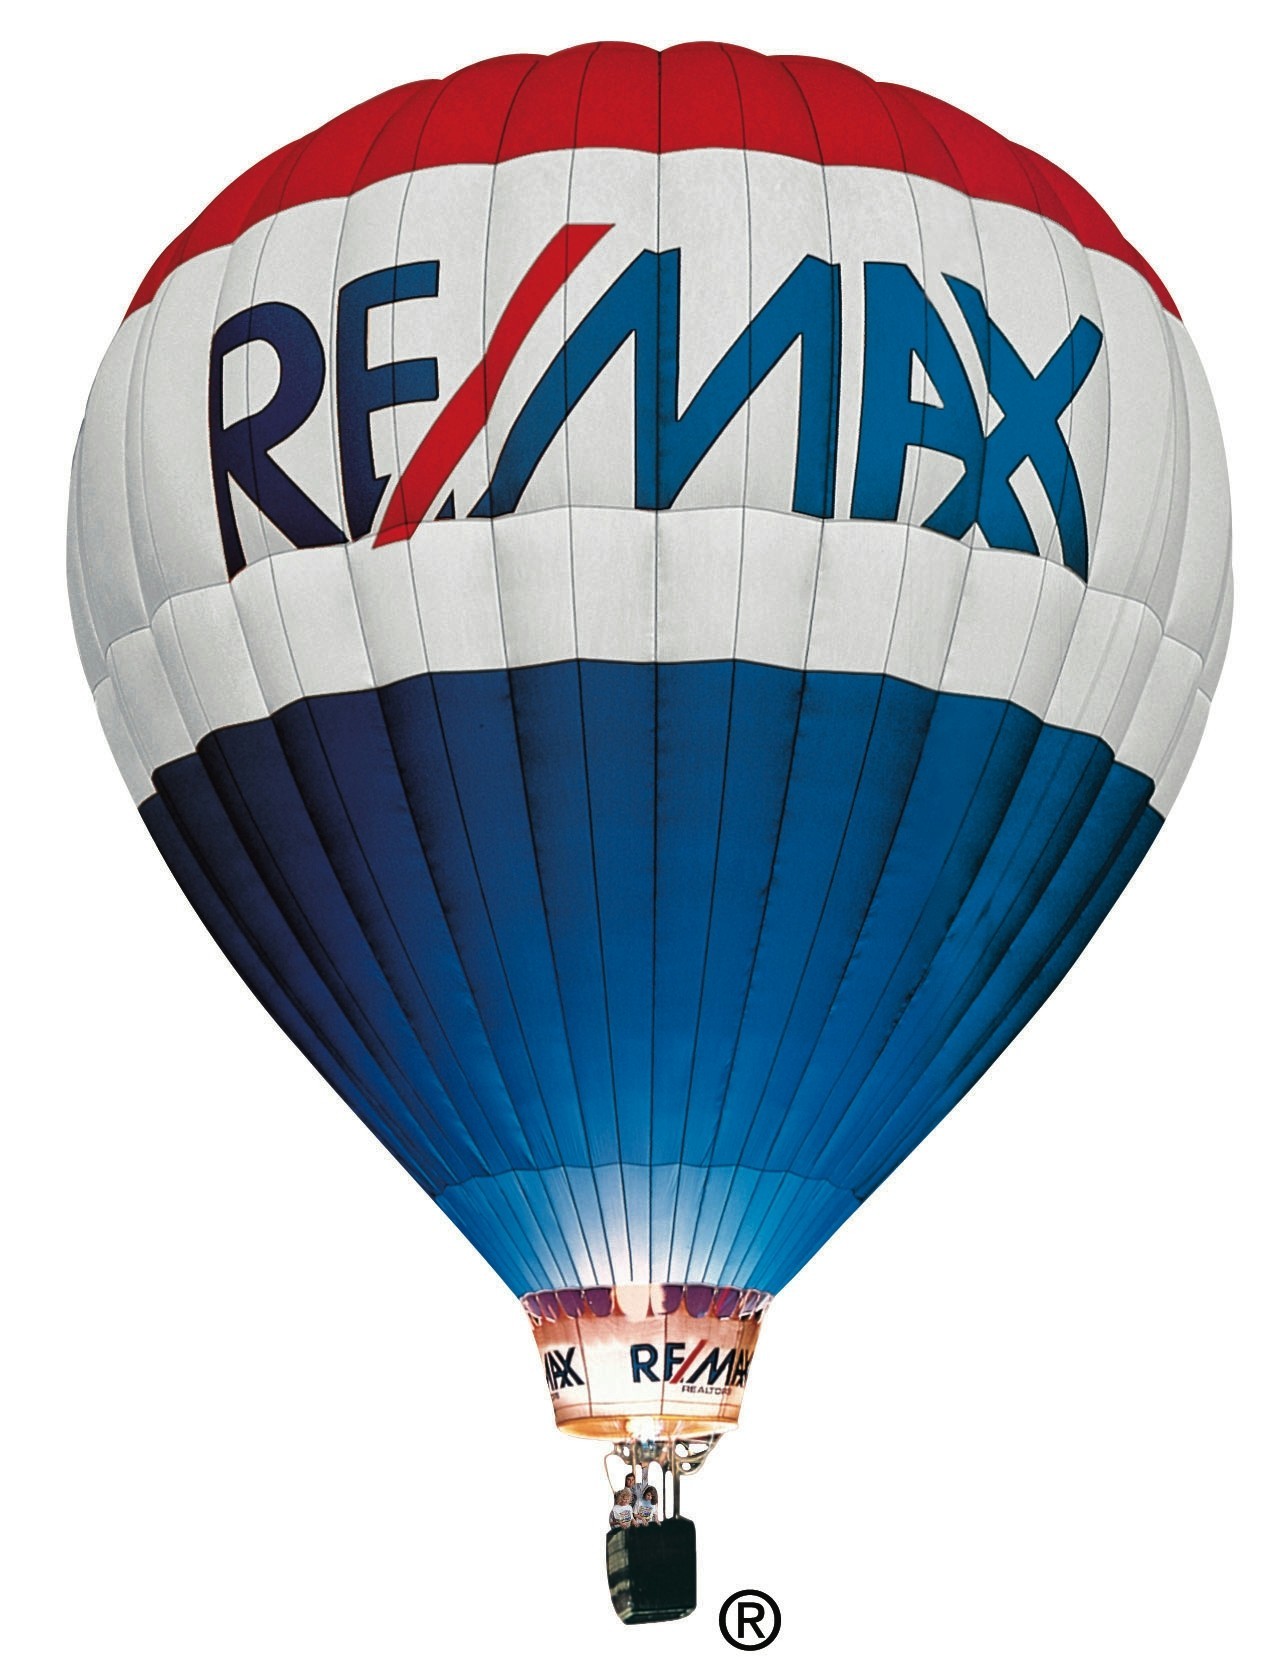 REMAX Balloon with detail.jpg